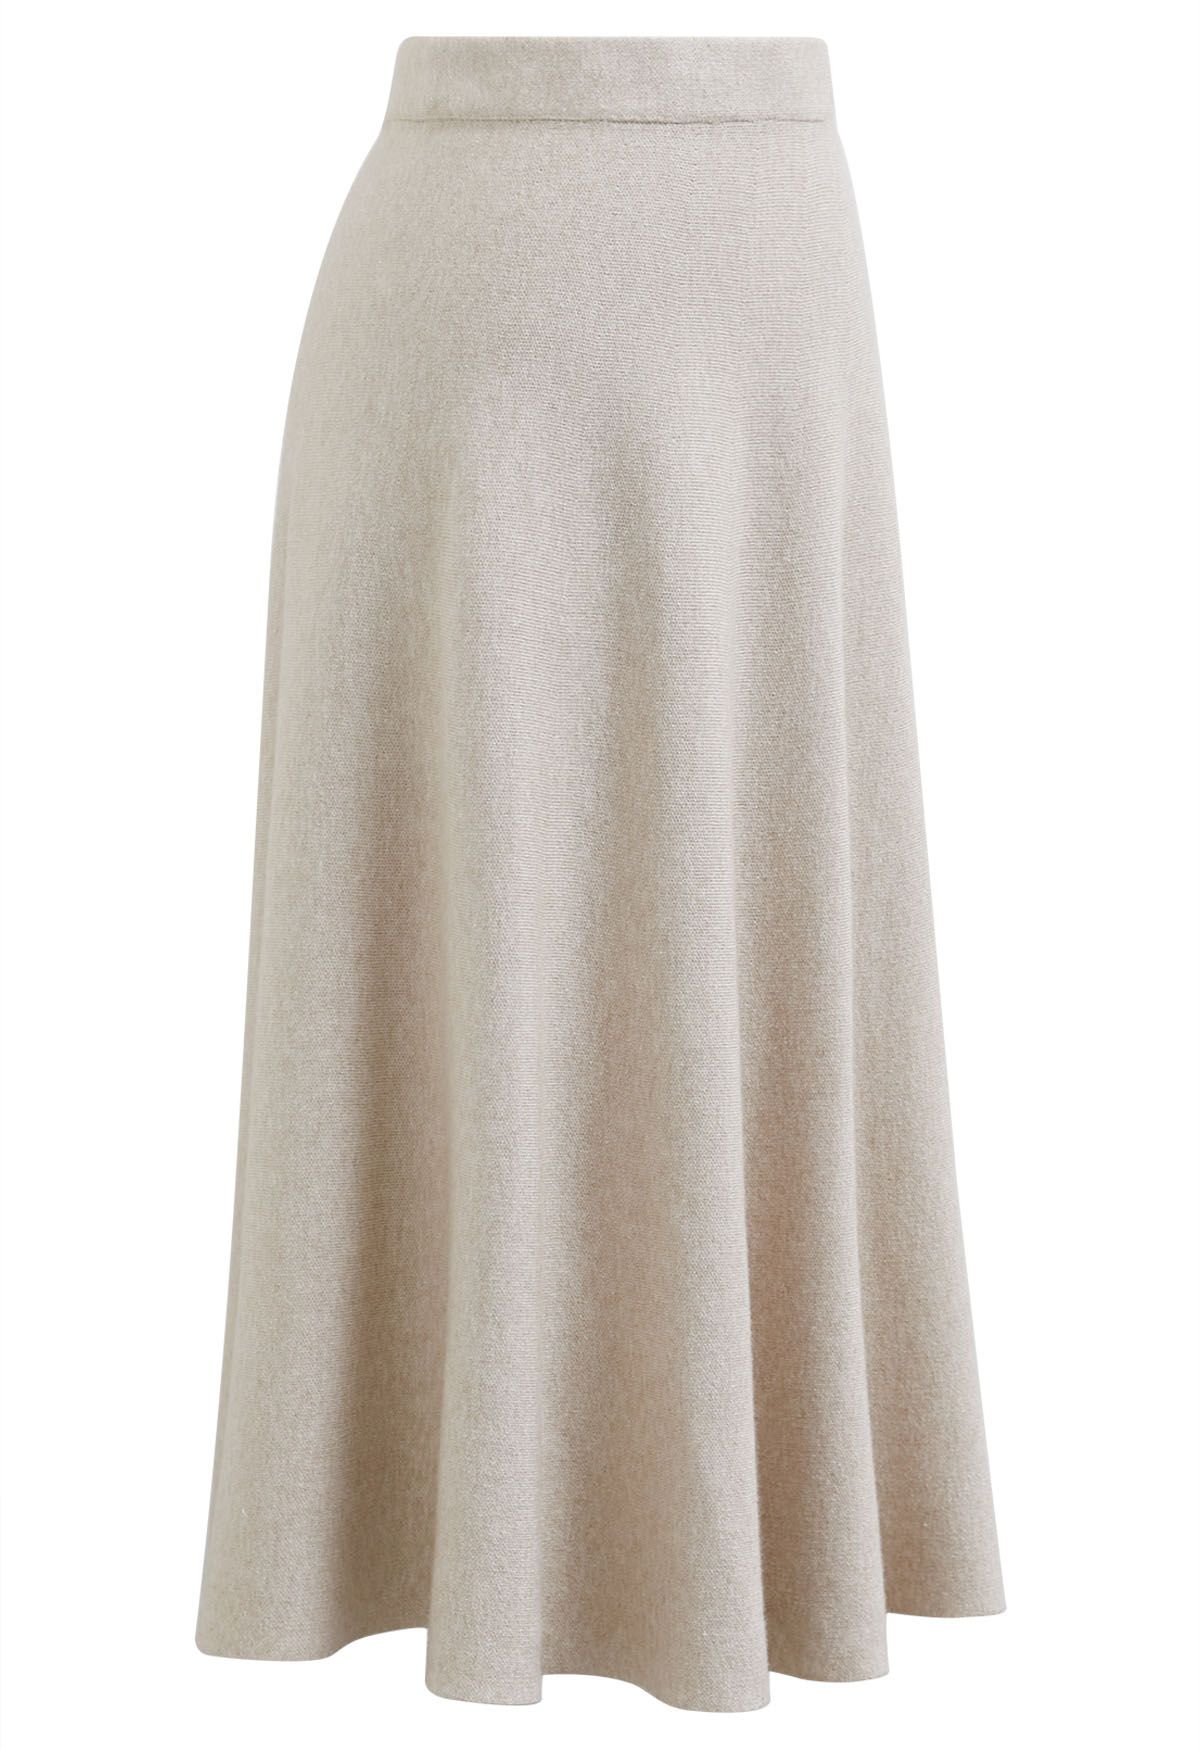 Solid Color A-Line Knit Midi Skirt in Ivory